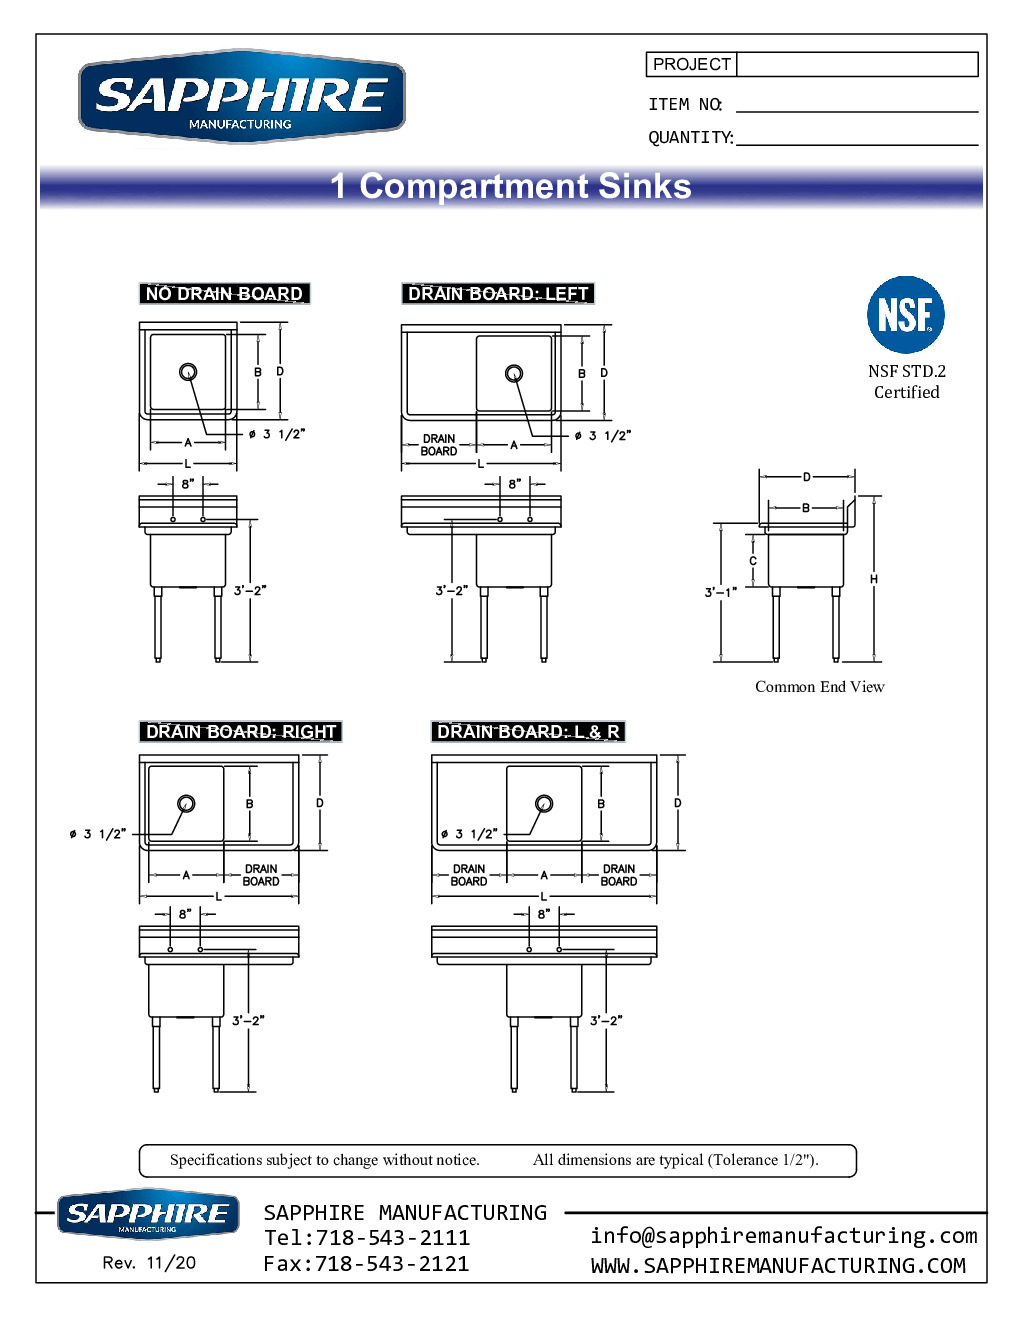 Sapphire Manufacturing SMS-1818R (1) One Compartment Sink